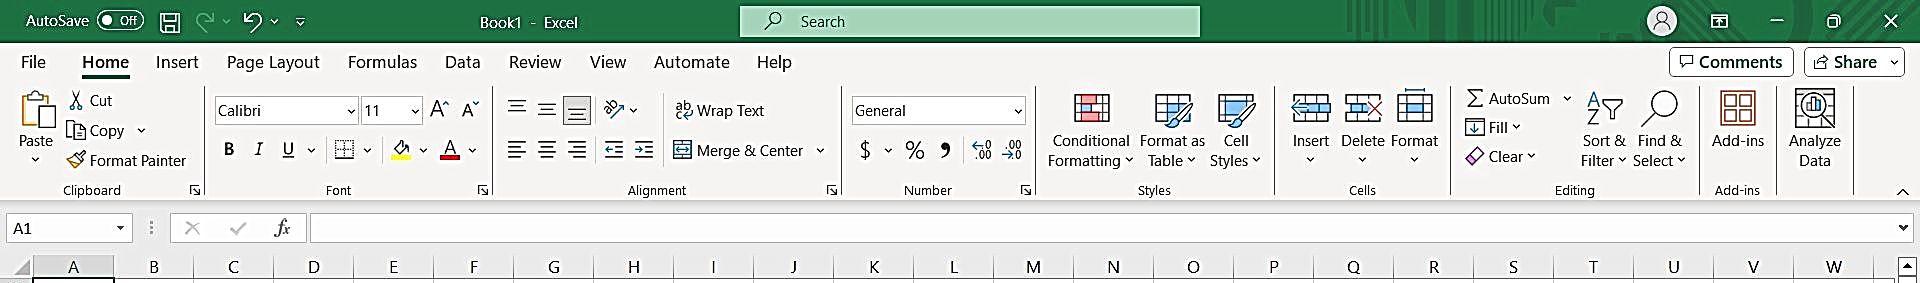 Home Ribbon Tab - Excel Hippo, Excel Training Course for Beginners